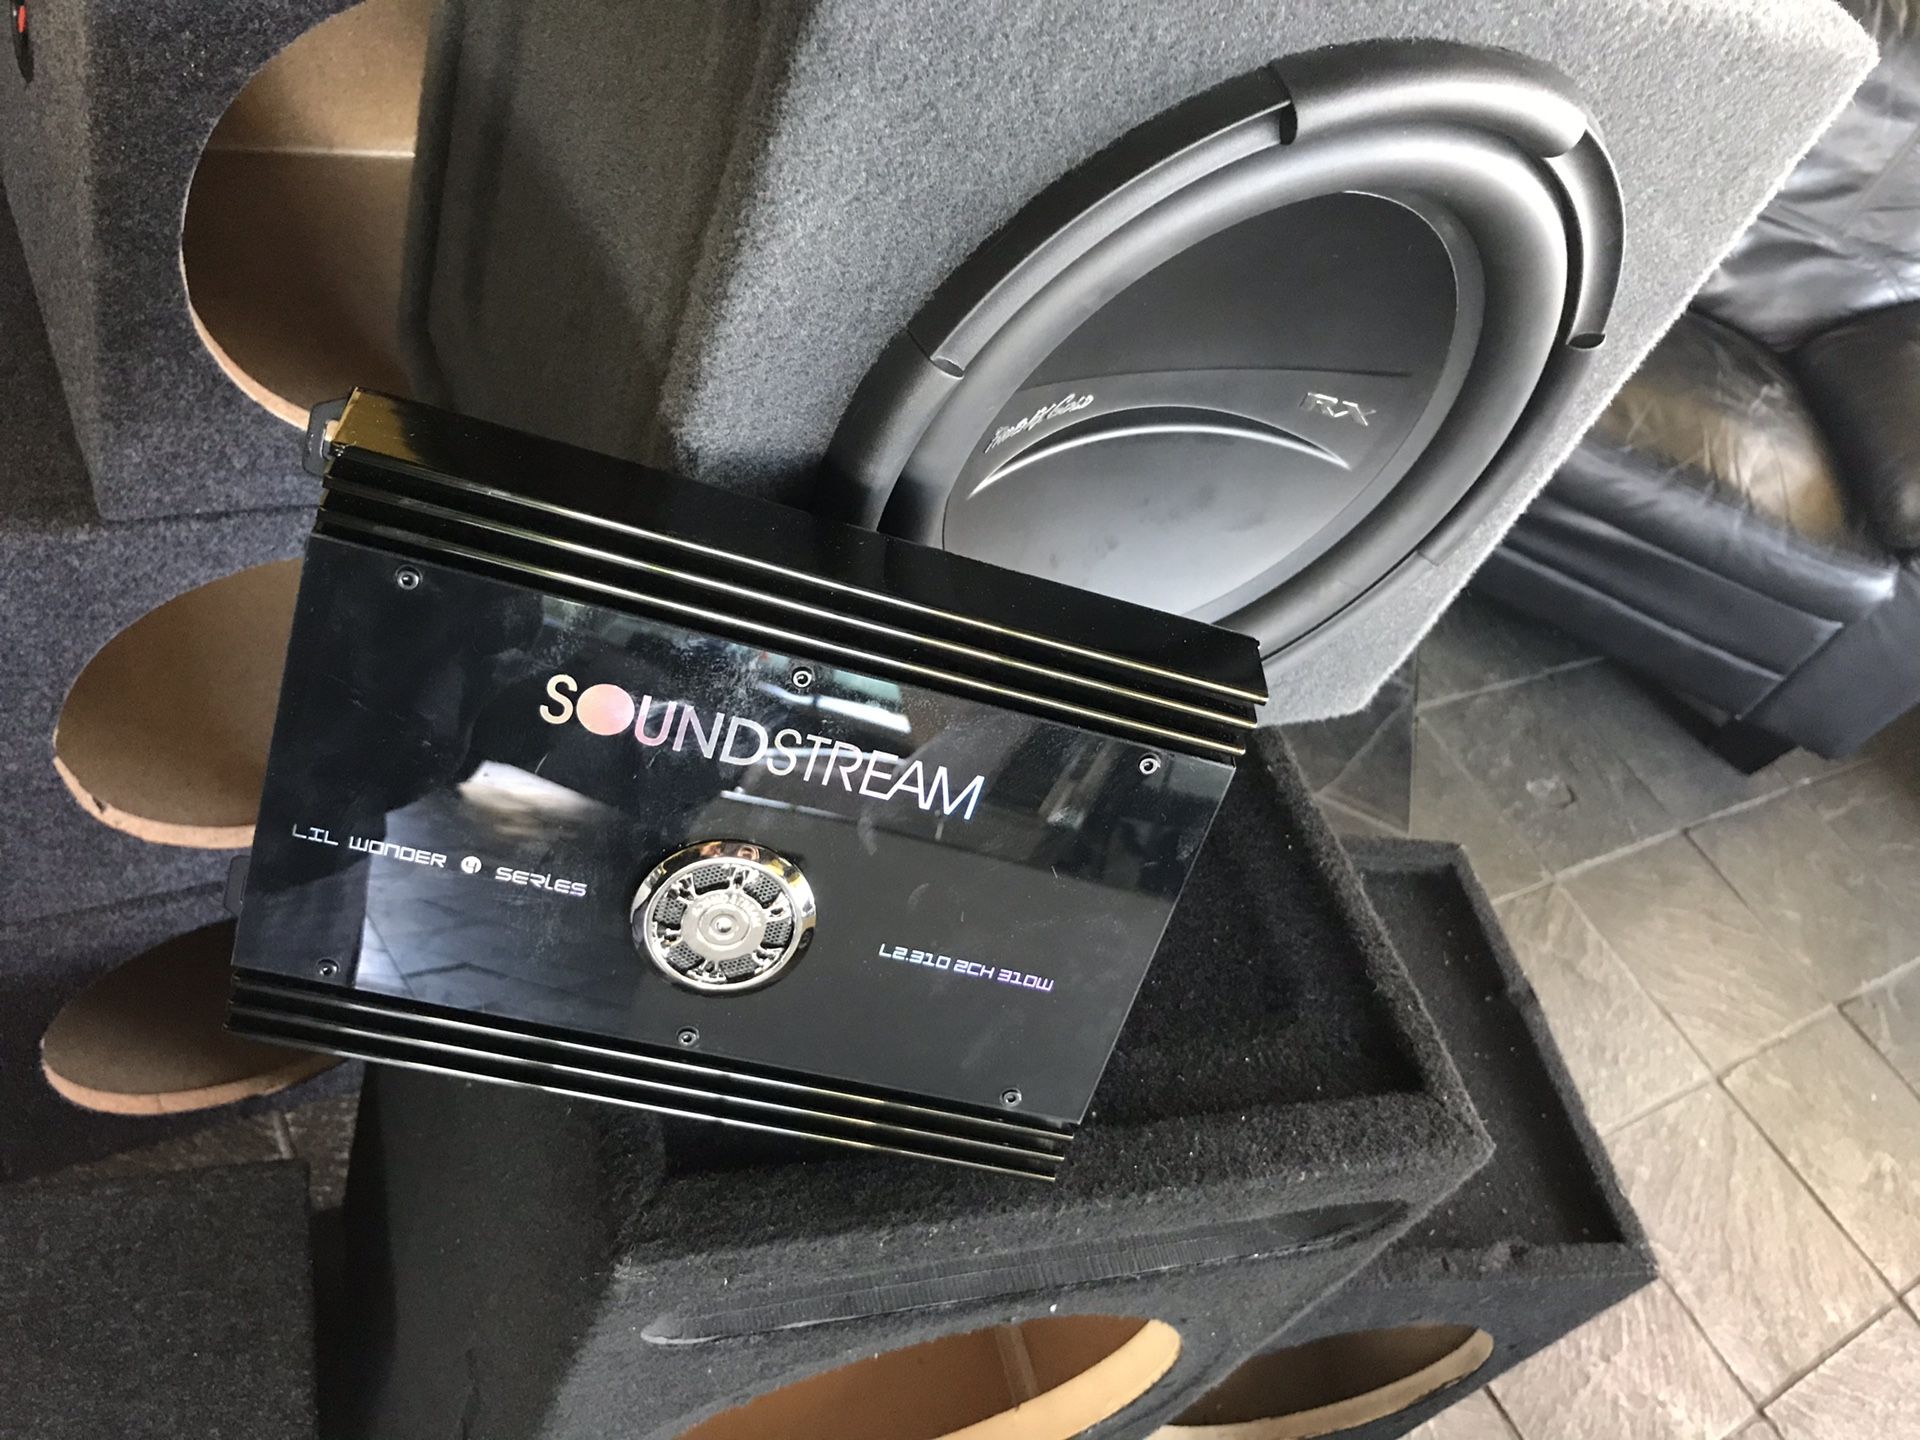 Car audio bundle 12” subwoofer Phoenix gold with box and soundstream amplifier great sound great deal. Finance available 100 days to pay